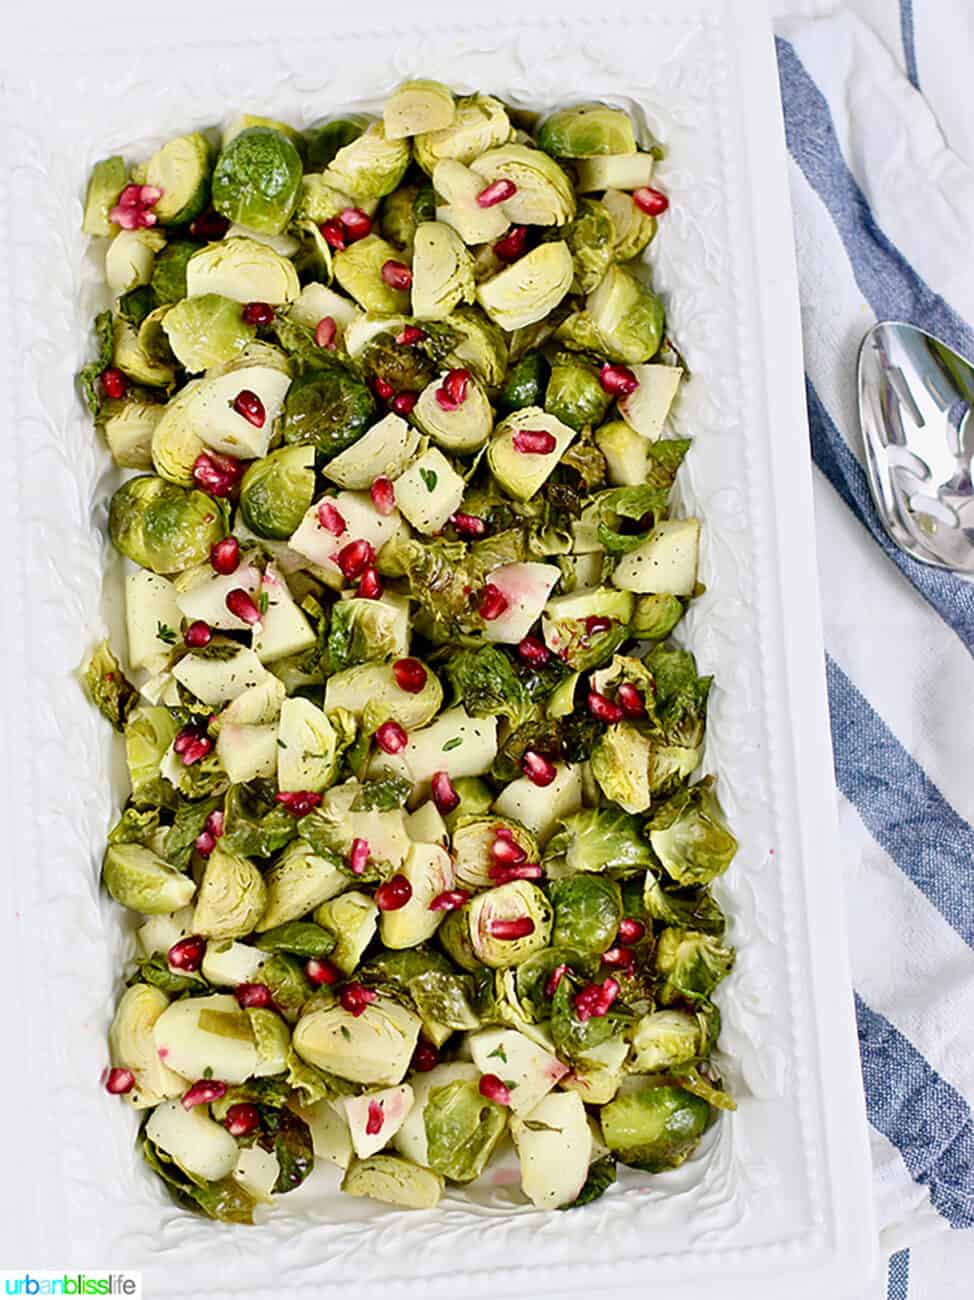 Roasted brussels sprouts with apples and pomegranate